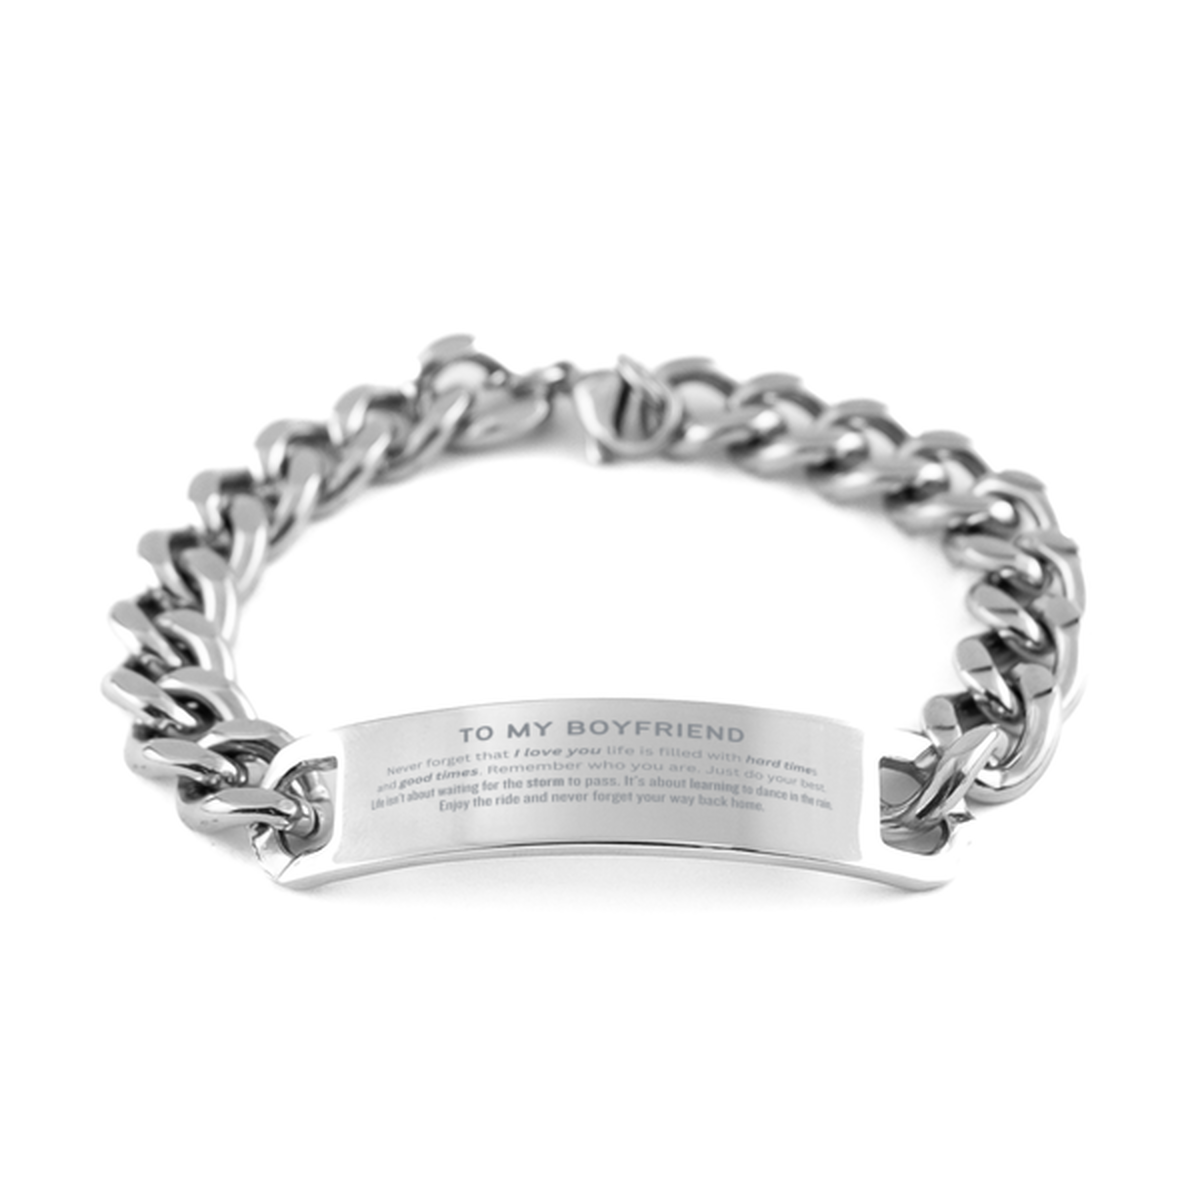 Christmas Boyfriend Cuban Chain Stainless Steel Bracelet Gifts, To My Boyfriend Birthday Thank You Gifts For Boyfriend, Graduation Unique Gifts For Boyfriend To My Boyfriend Never forget that I love you life is filled with hard times and good times. Remem